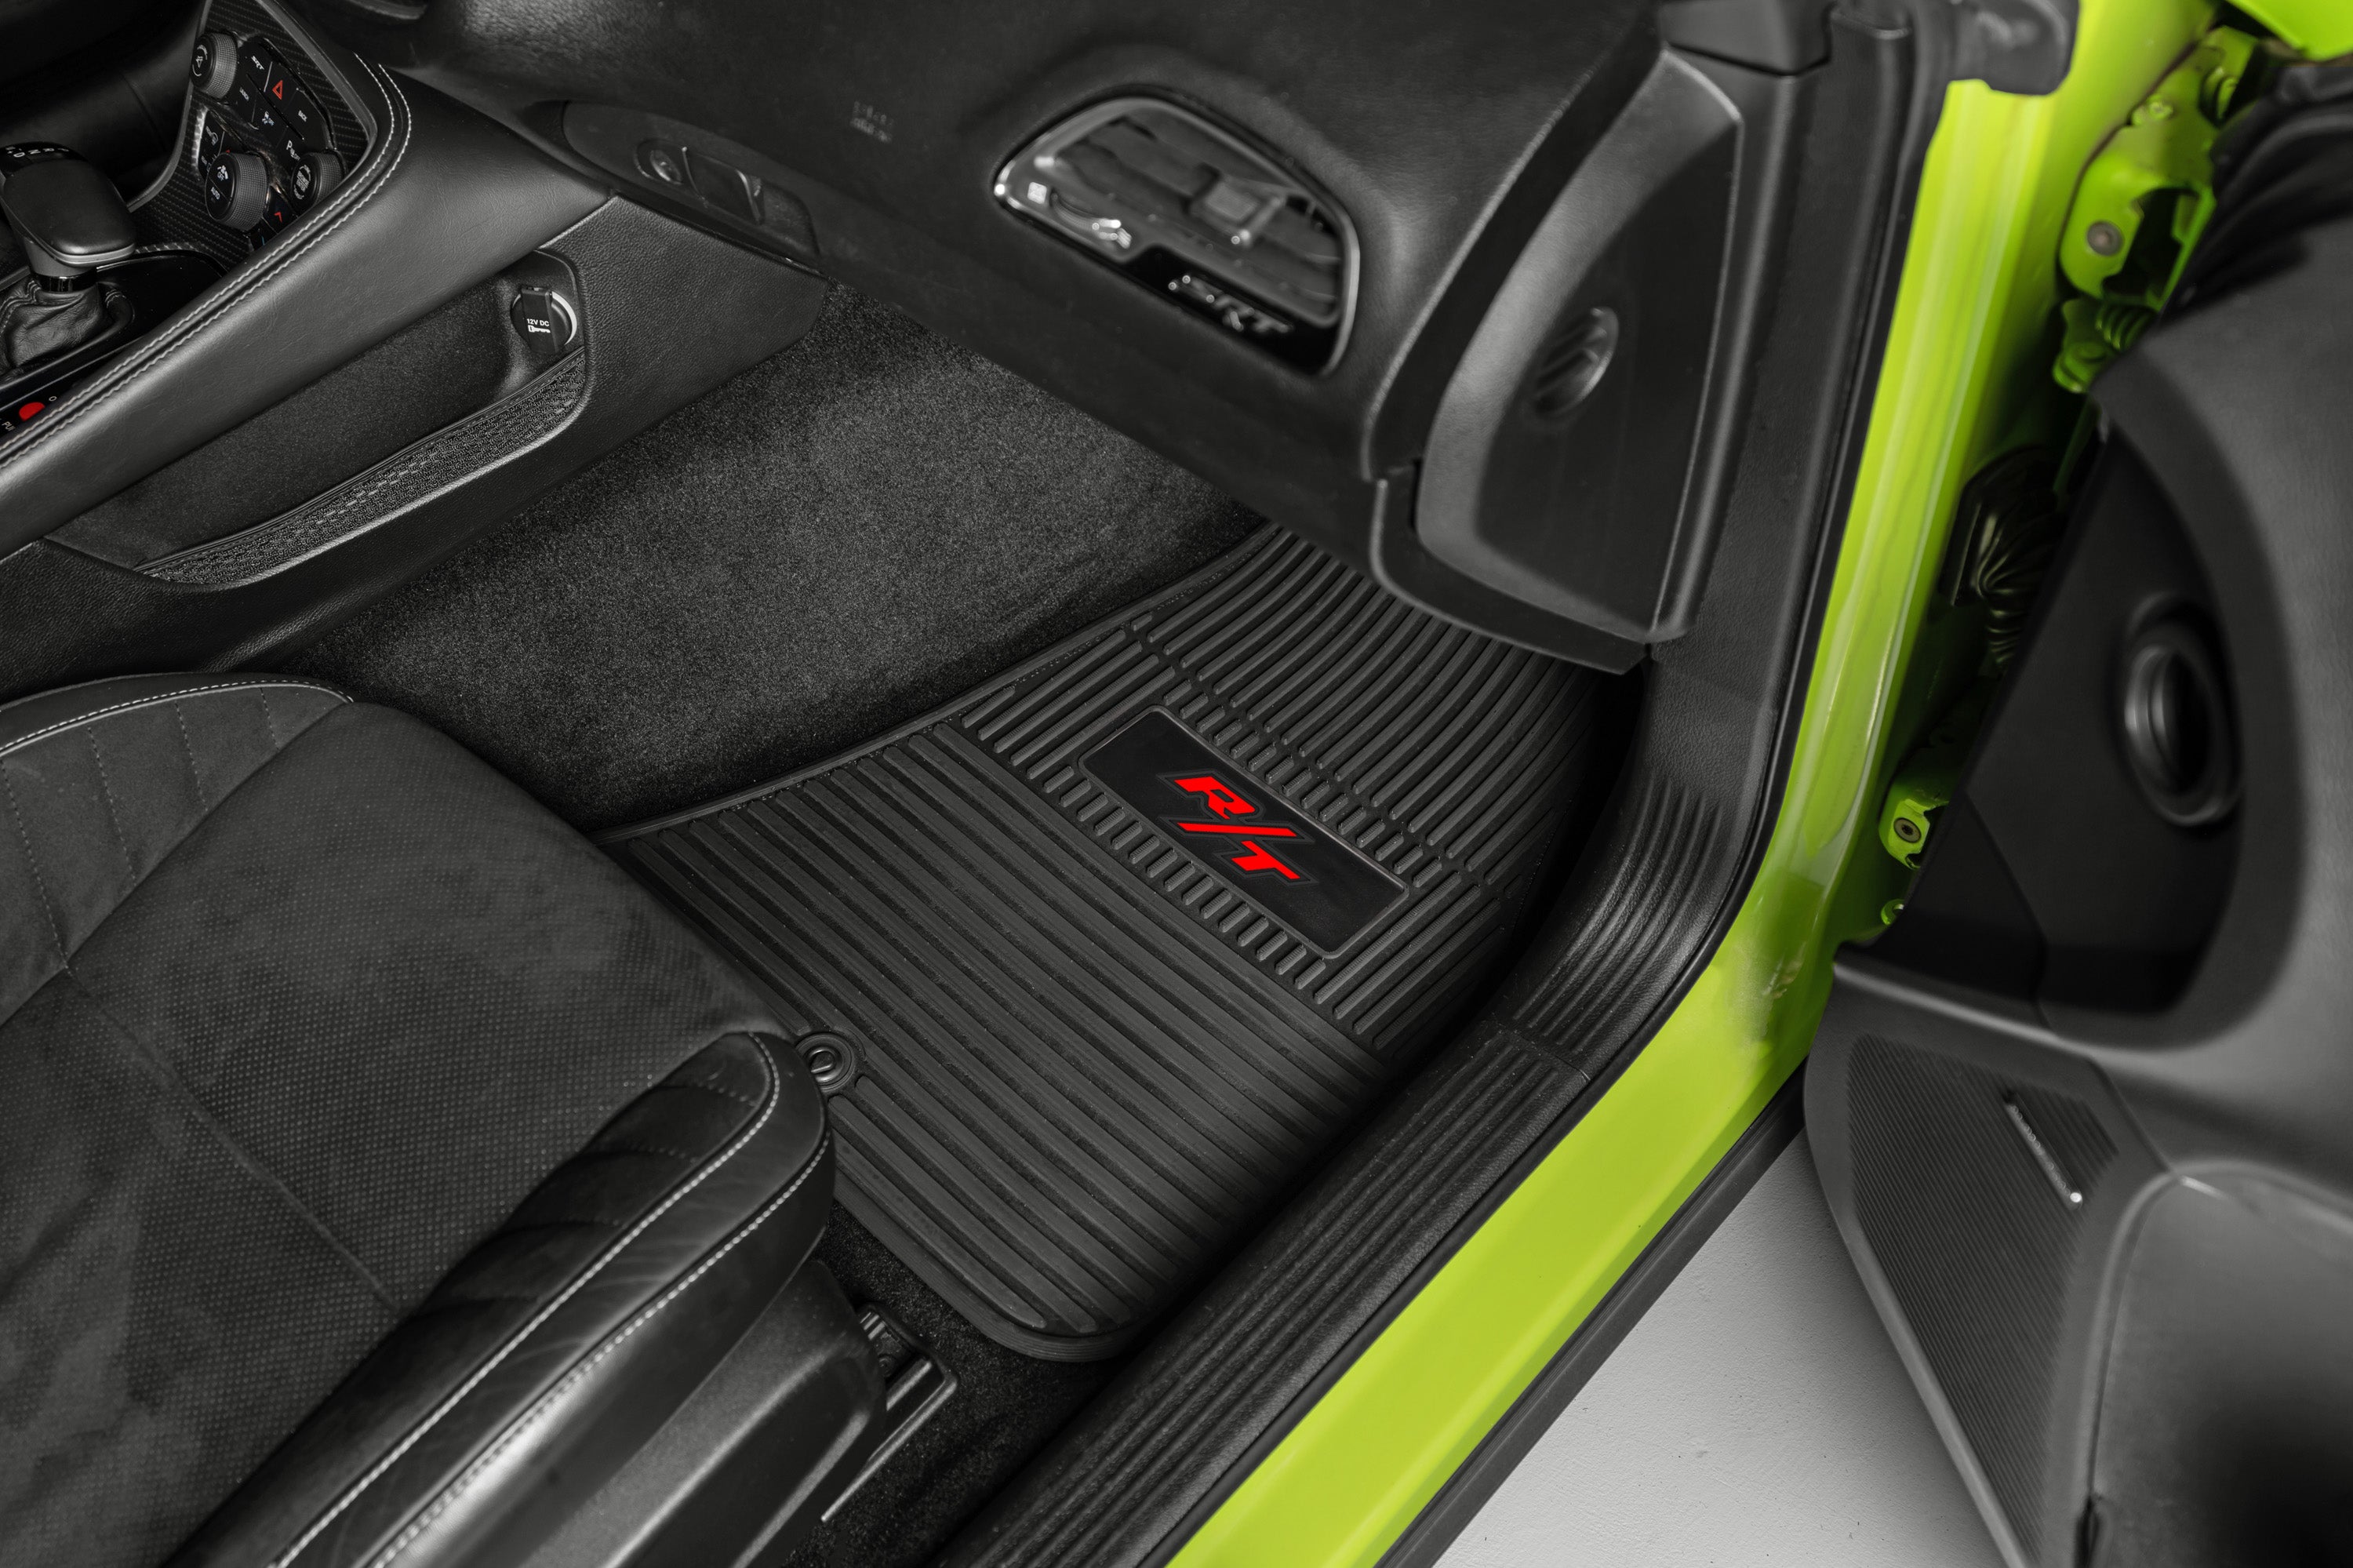 Charger Floor Mats 11-23 Dodge Charger RWD 4 Piece Custom Vintage Scene w/ R/T (2008-2014) Insert - Black w/ Lime Insert FlexTread